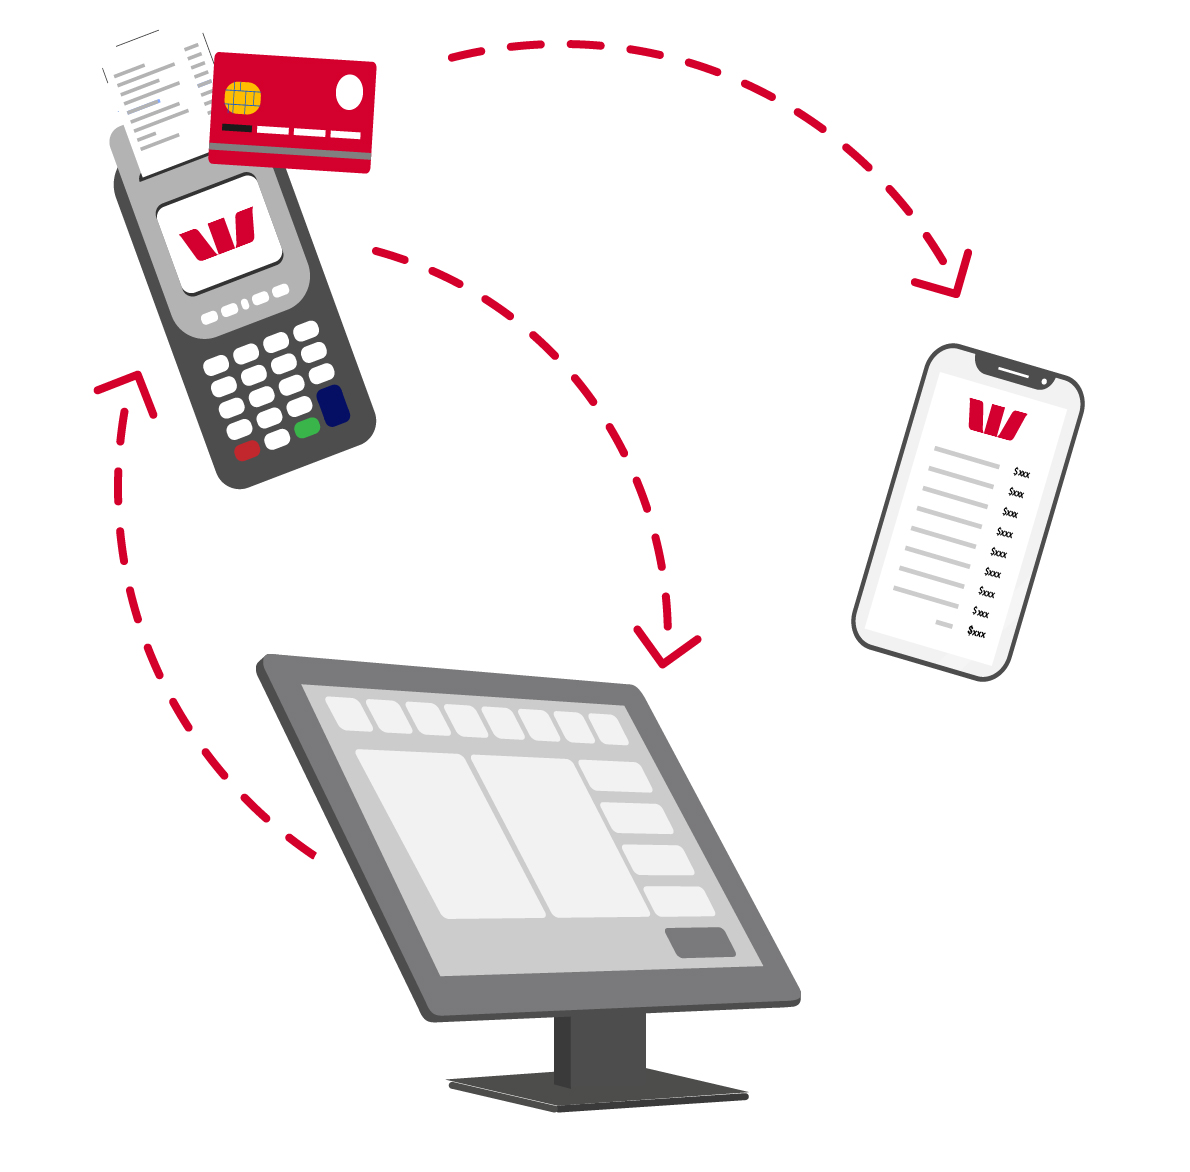 Diagram showing how EFTPOS integrates with POS systems.